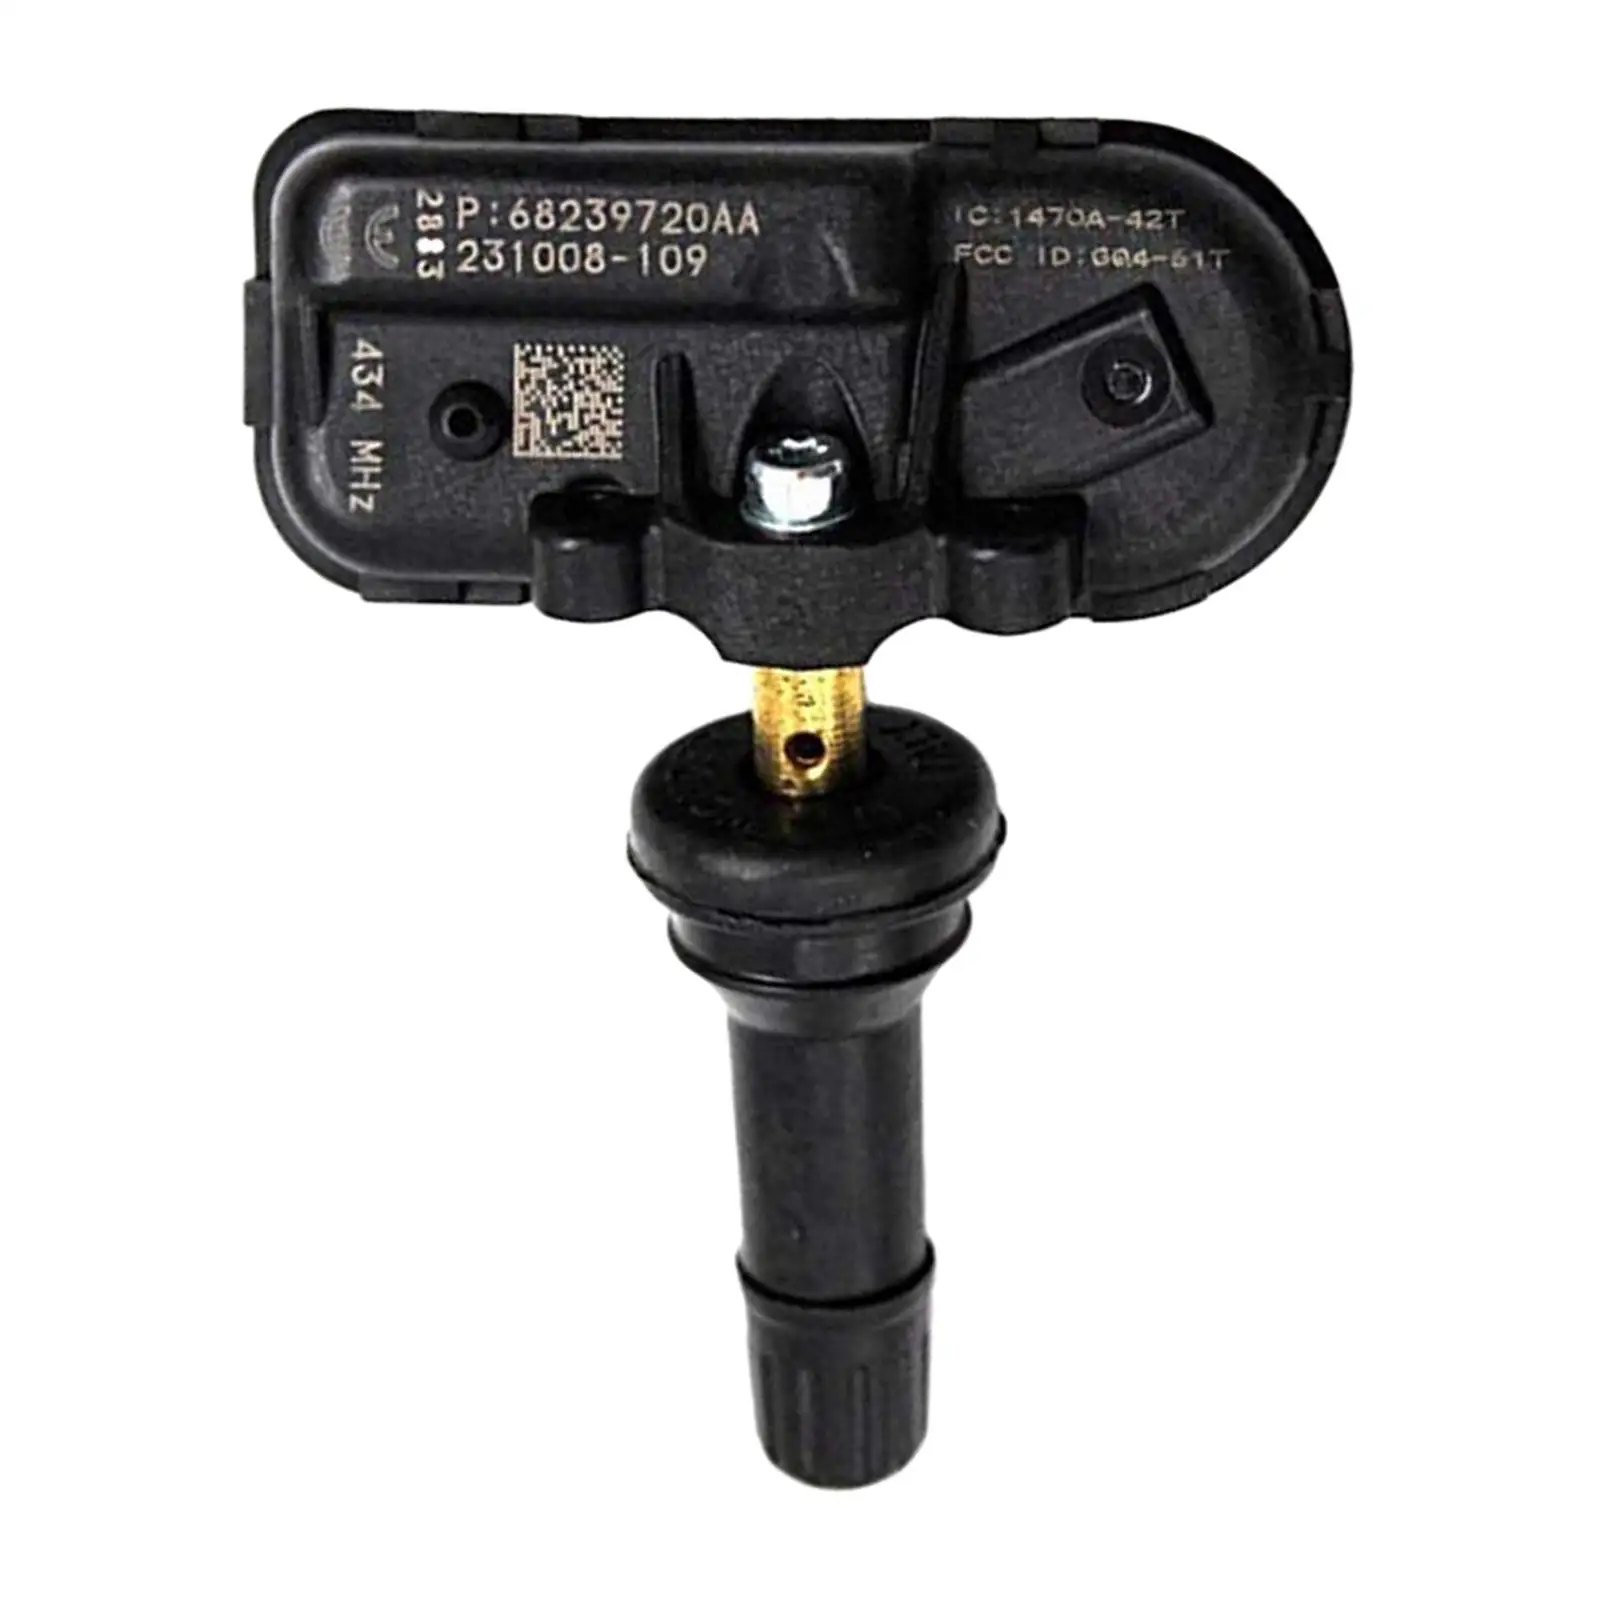 Tire Pressure Monitoring Replacement Sensors 68239720AA Fits for